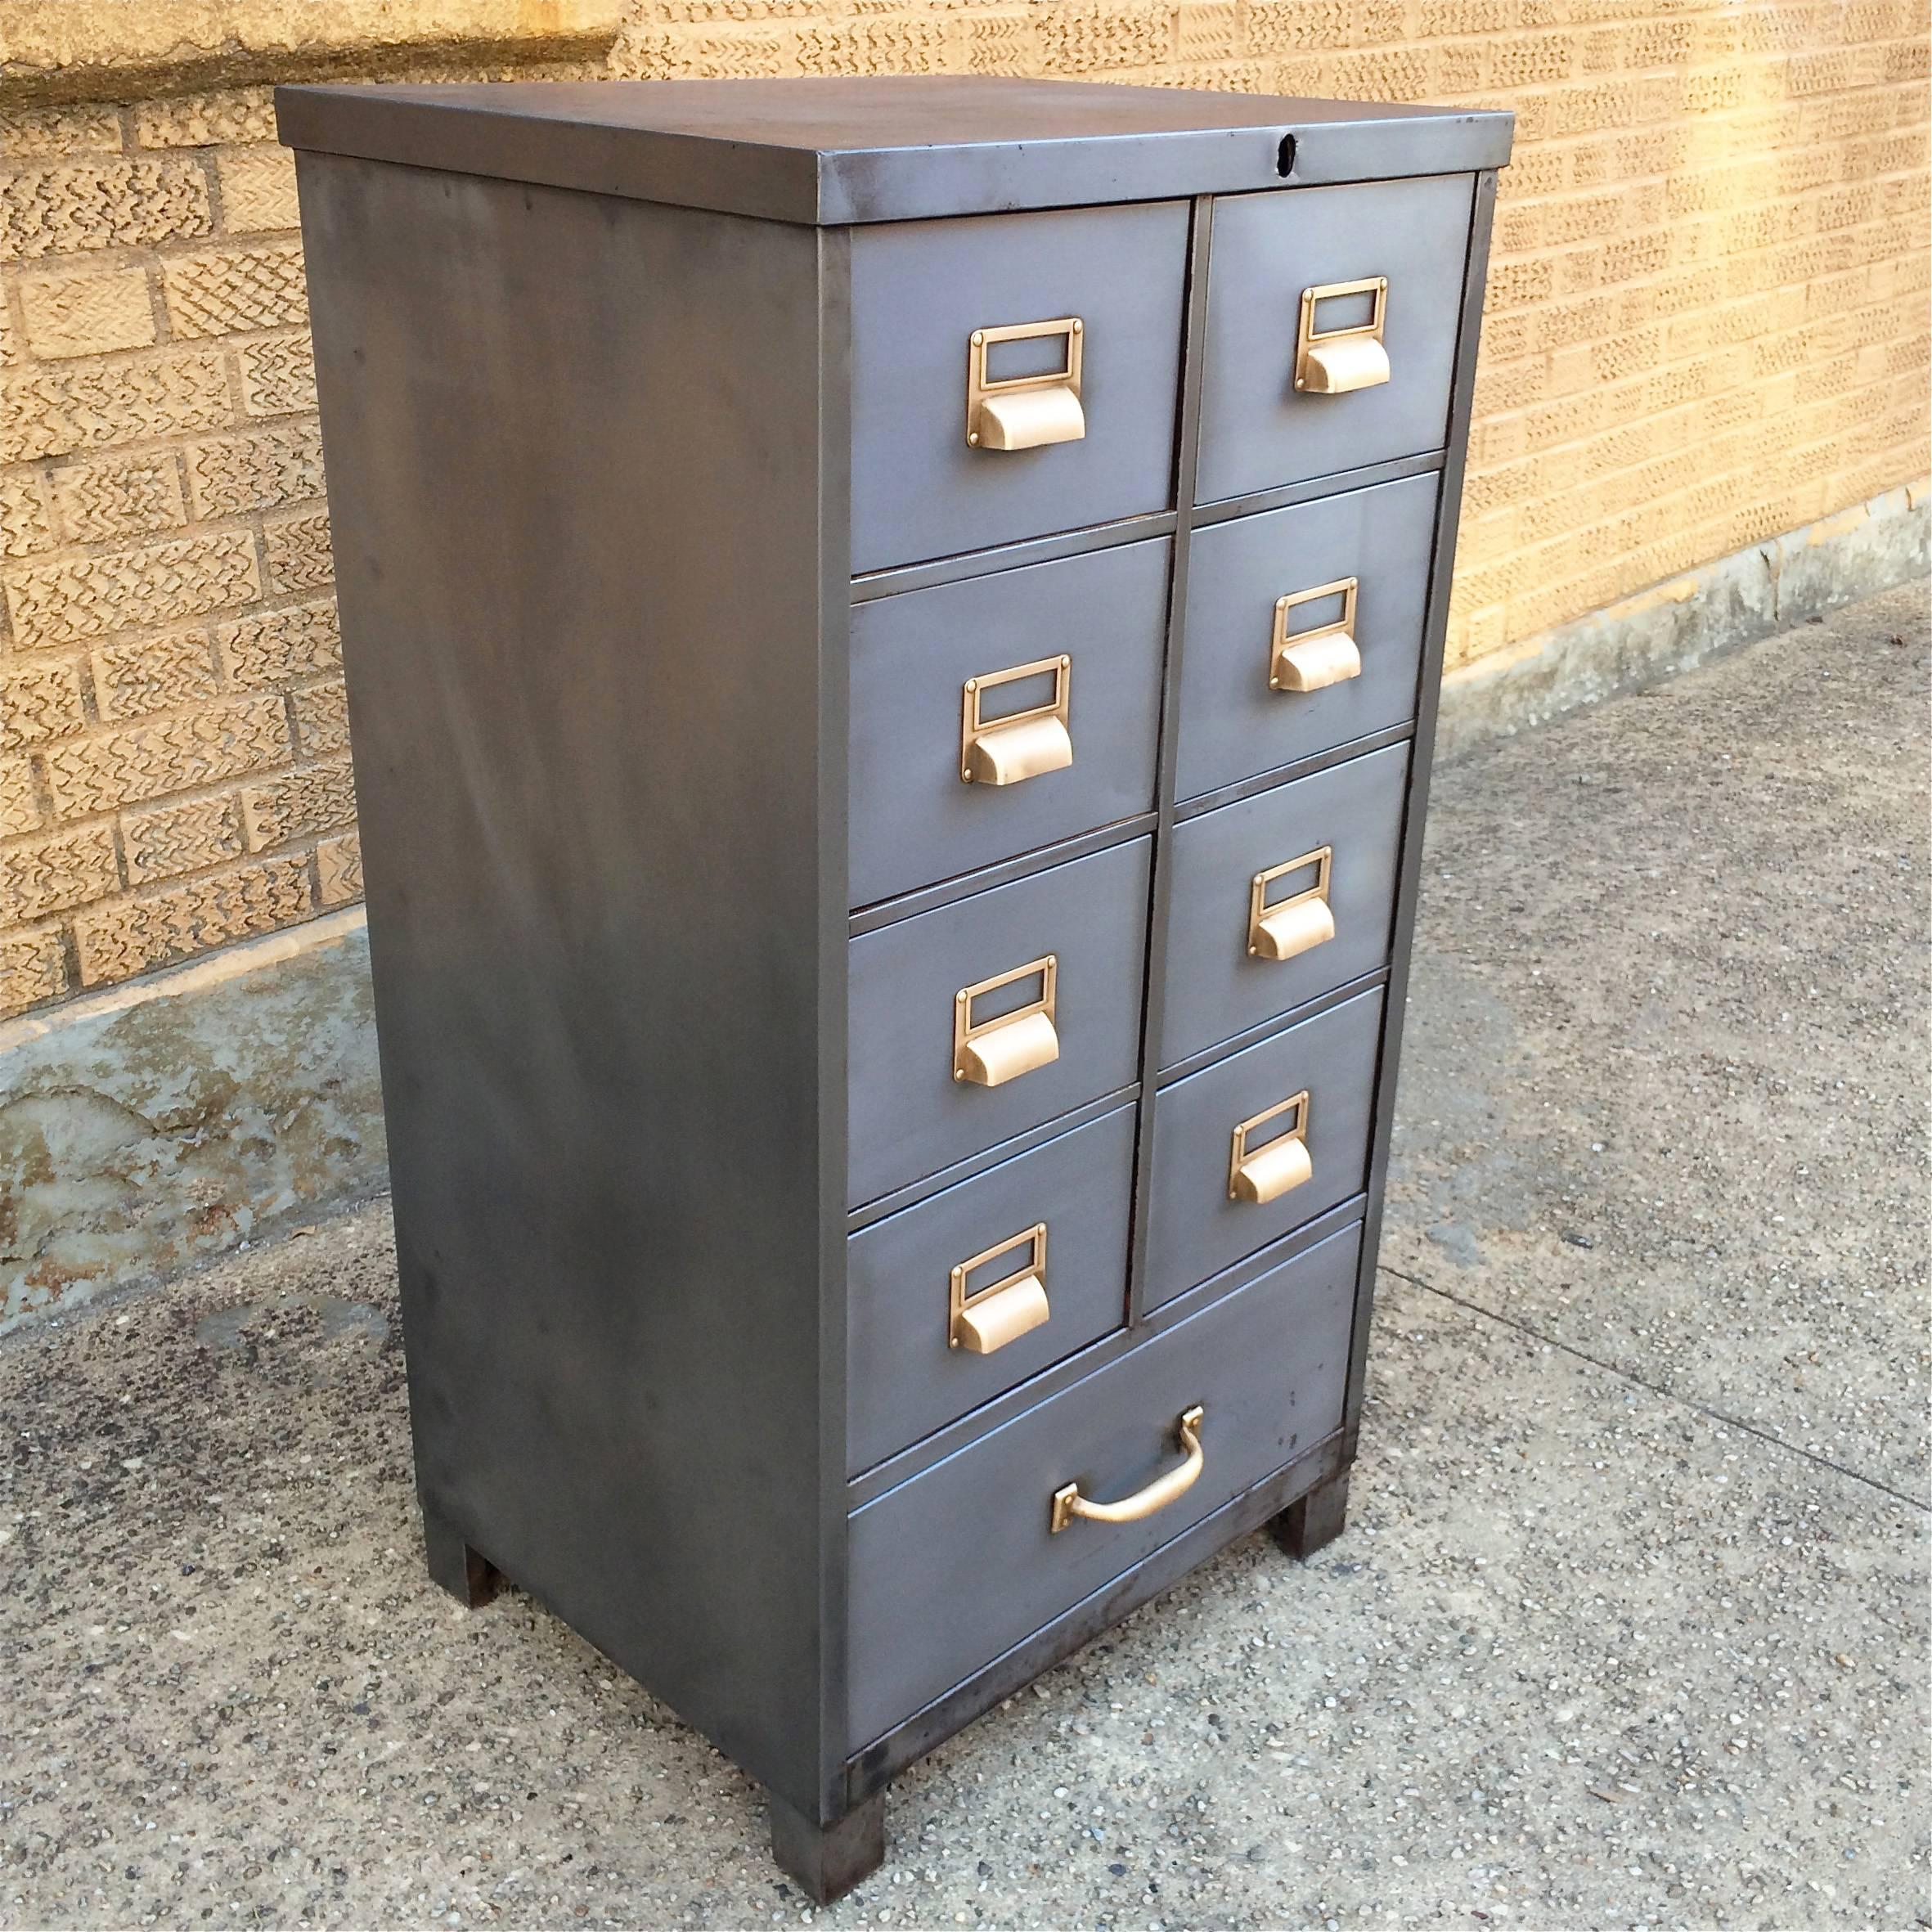 Mid-Century, hand-polished, brushed steel, 9 drawer, office, index file cabinet with polished brass hardware by Cole Steel.

Index drawers measures 8